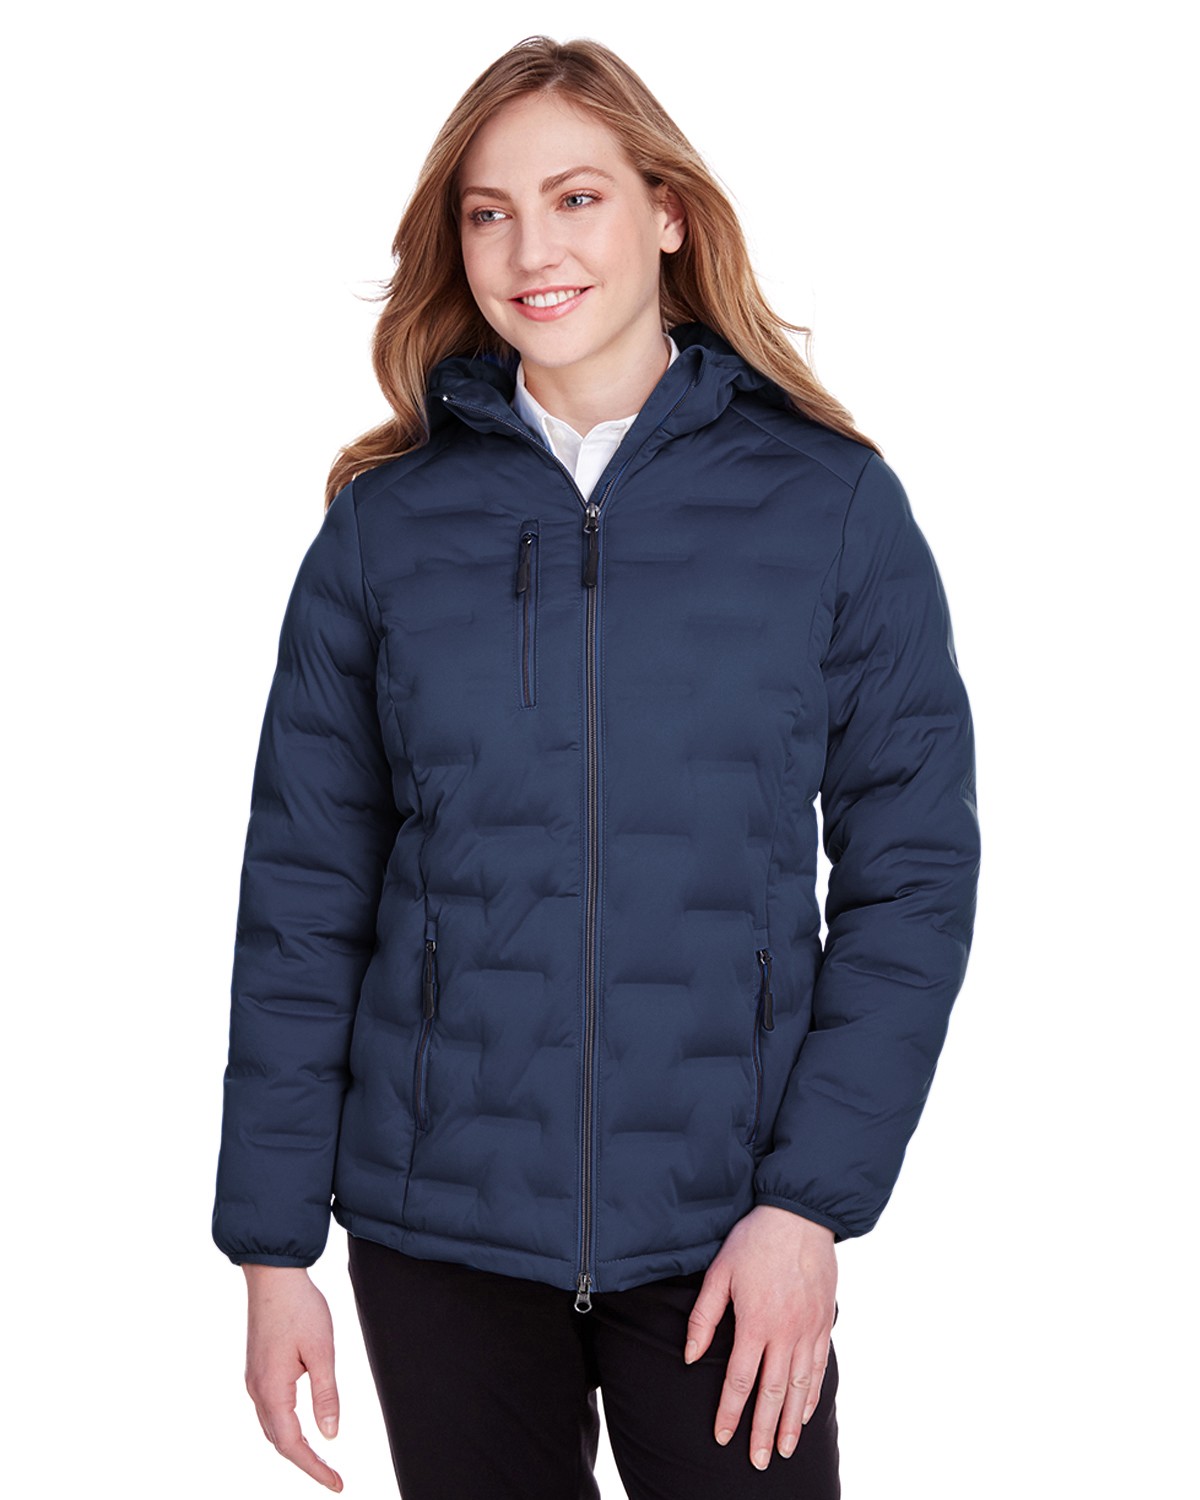 North End NE708W Ladies Loft Puffer Jacket - Free Shipping Available